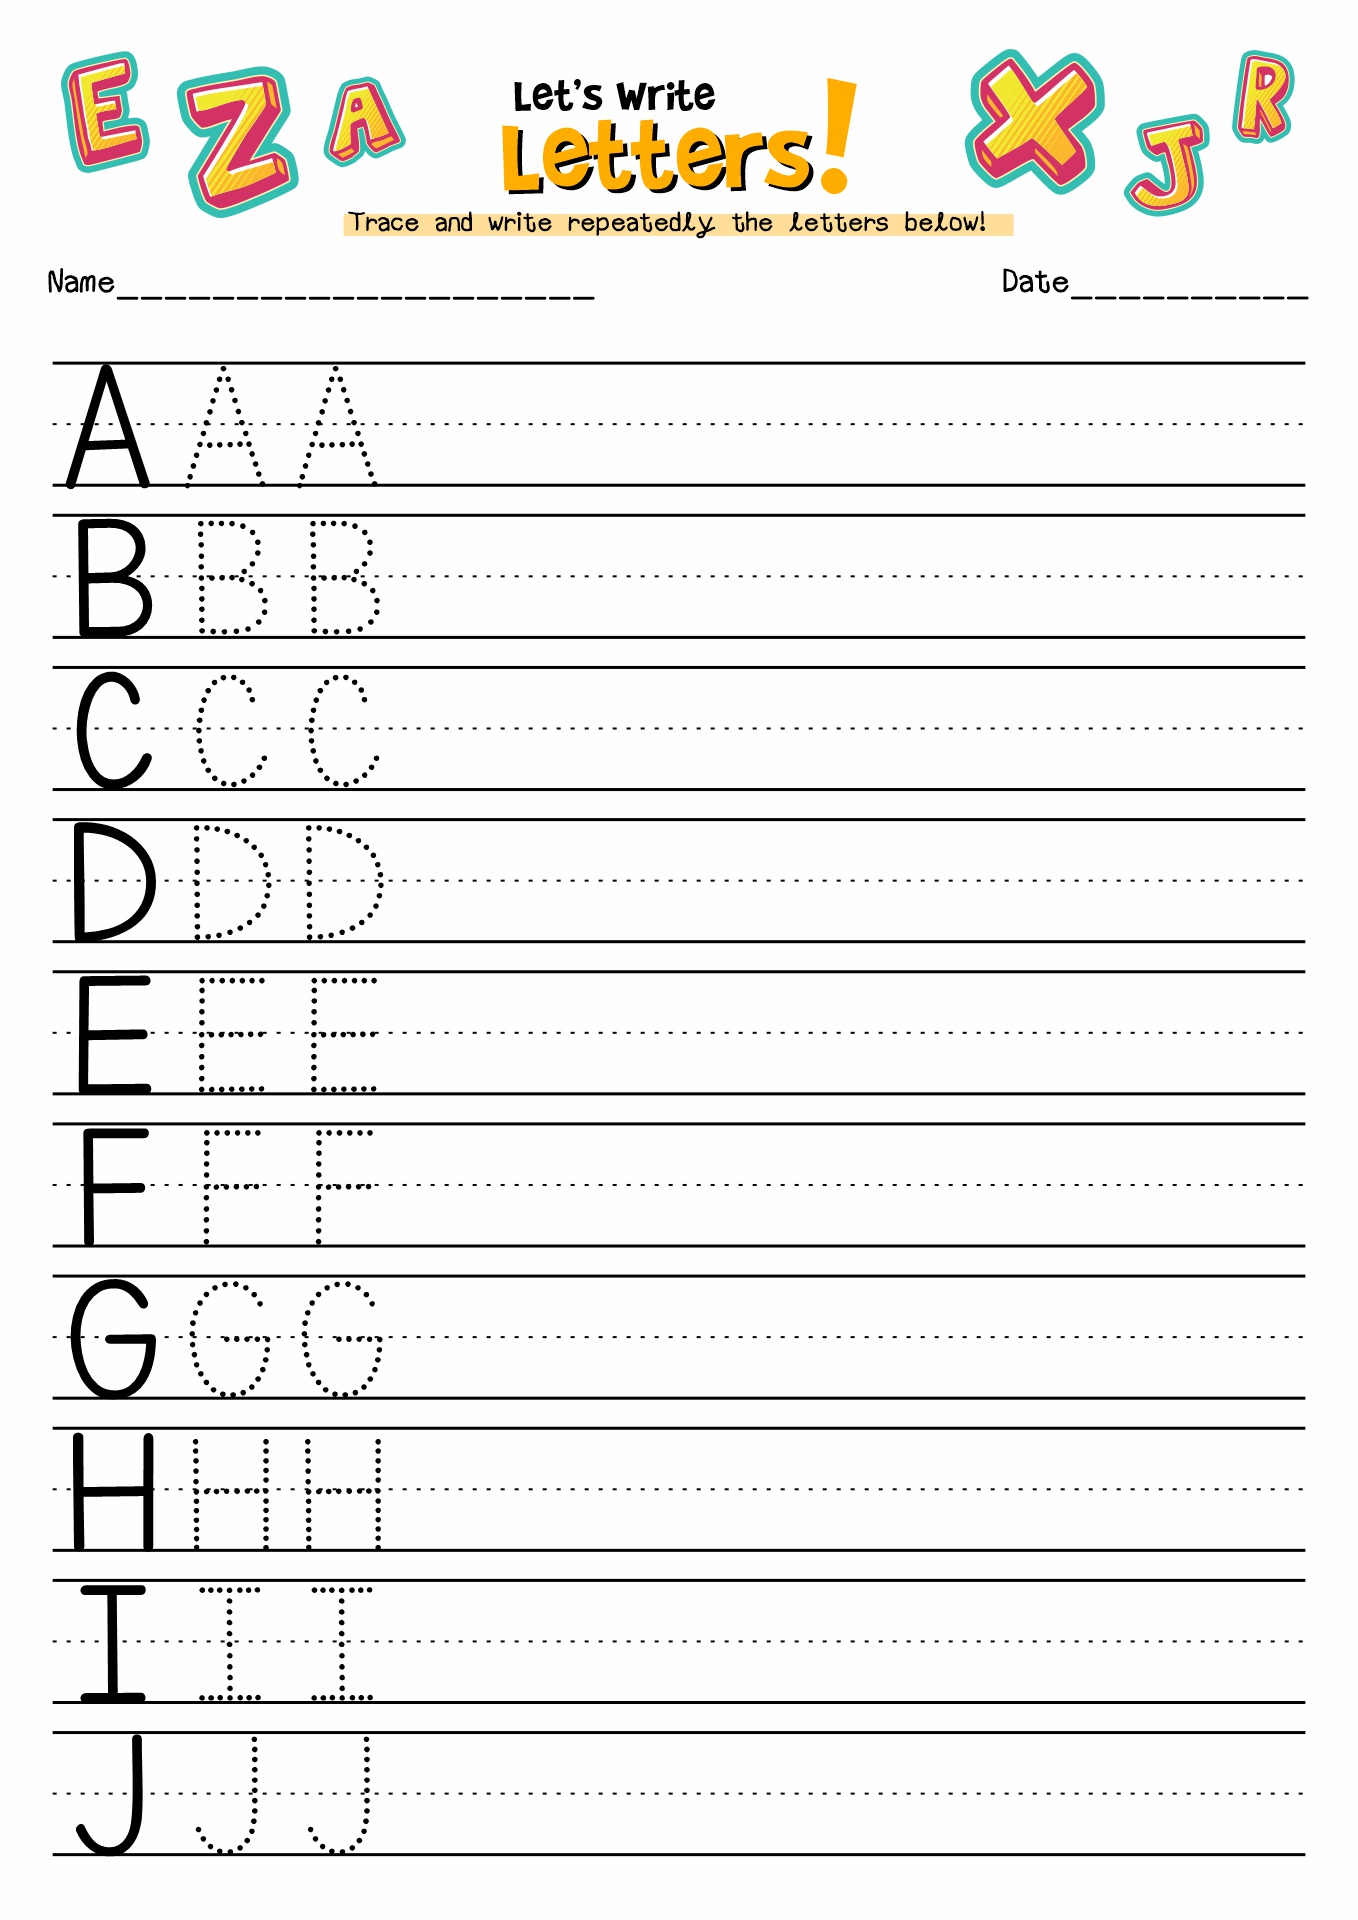 18-photos-best-practice-writing-letters-printable-worksheets